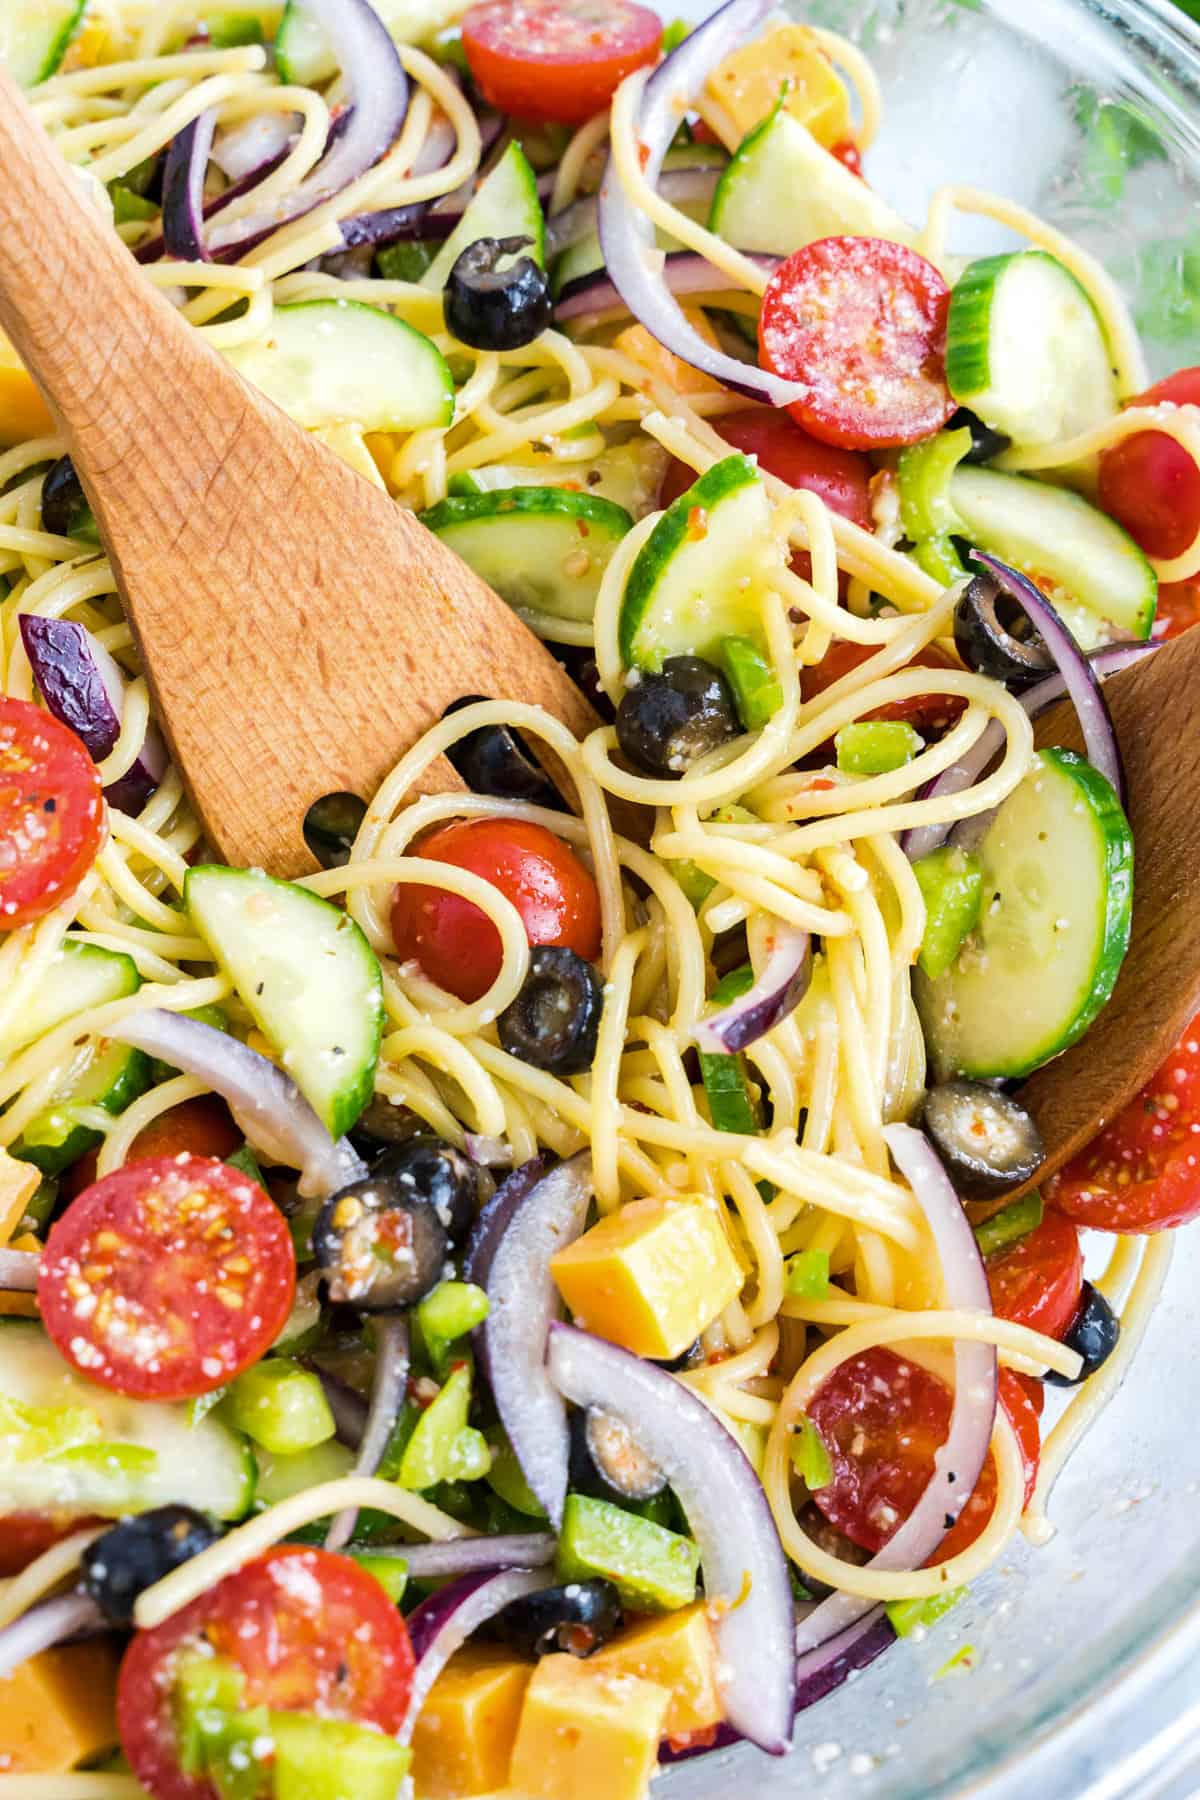 Tossing Spaghetti Salad in bowl with wooden spoon